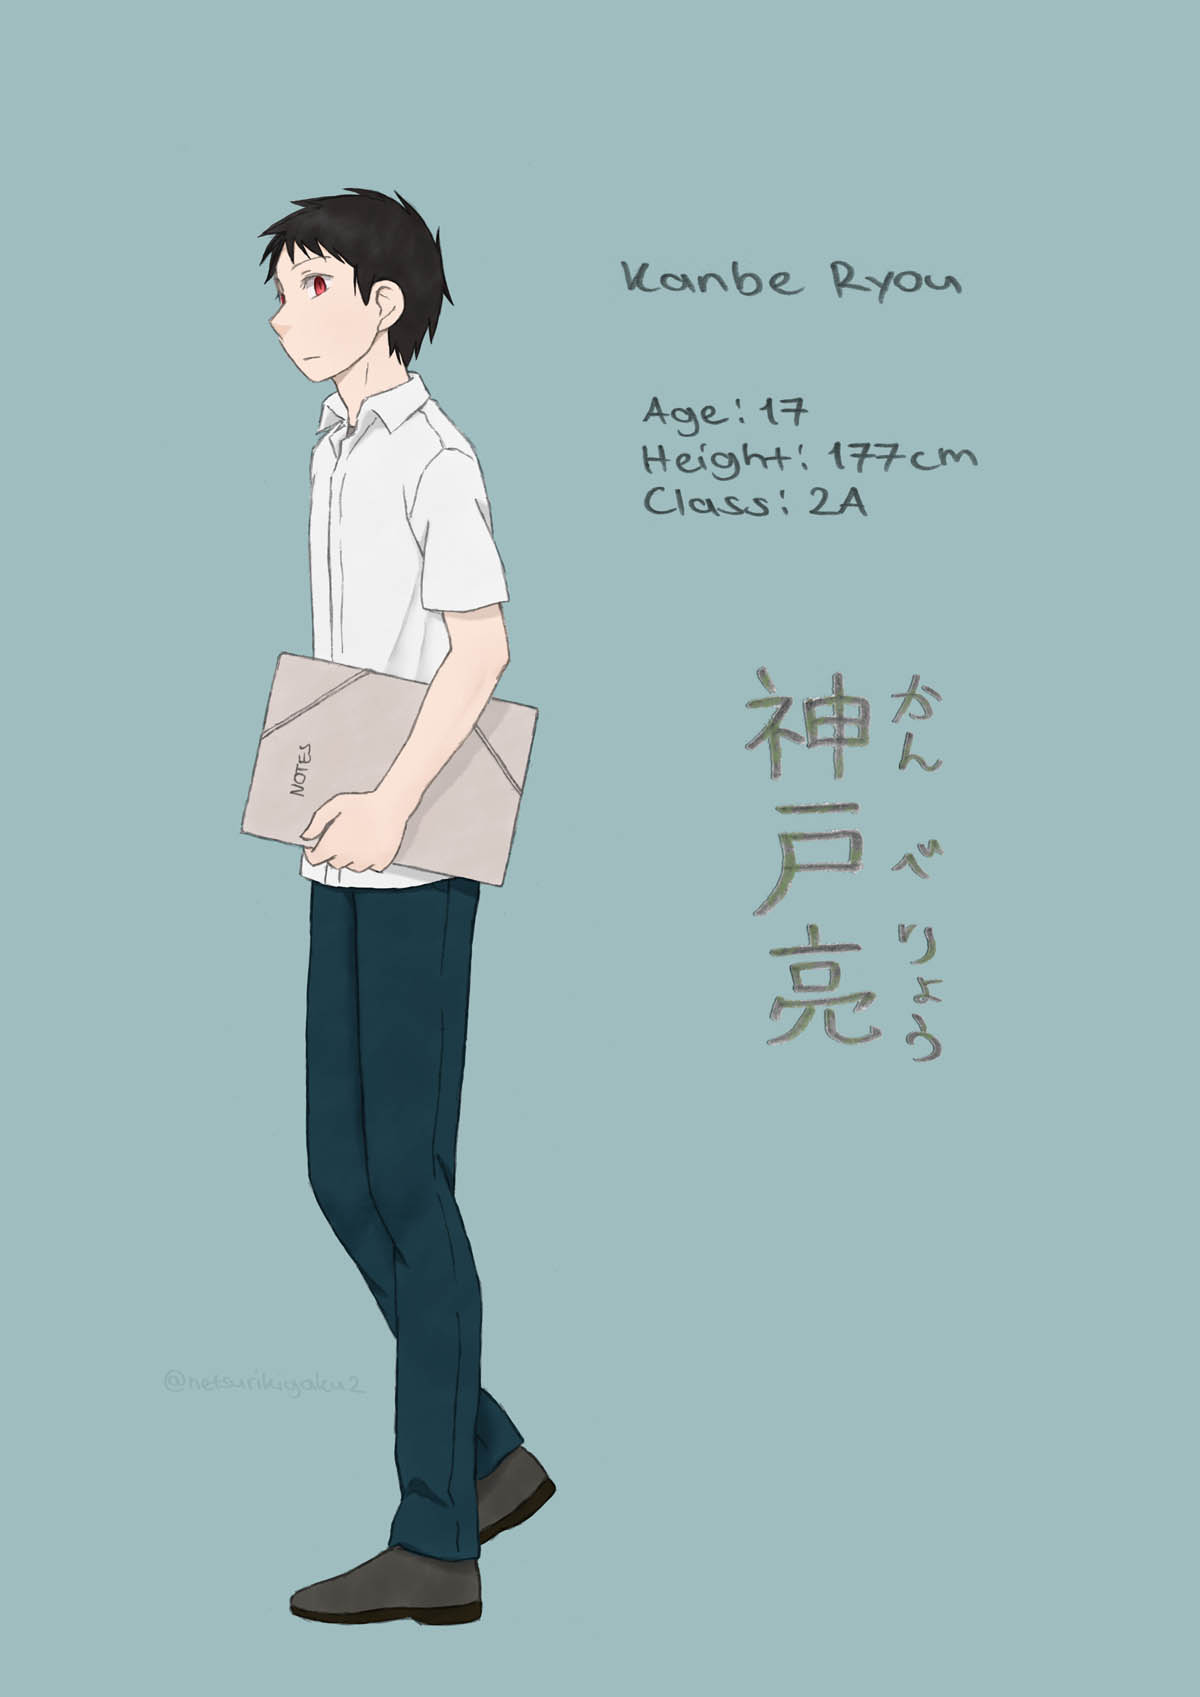 Character introduction of Kanbe Ryou